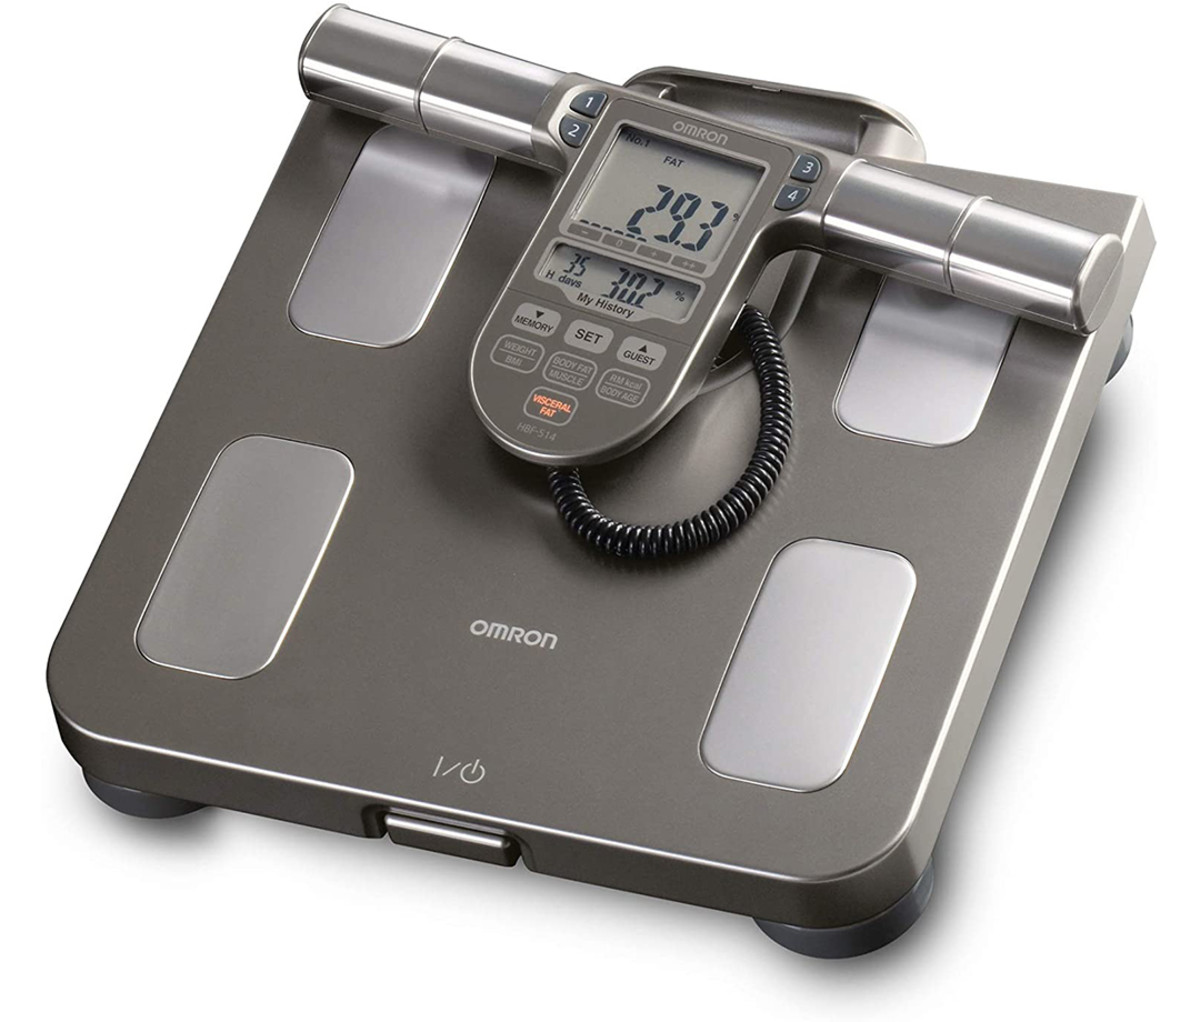 Black Friday  deal: The Renpho smart scale is under $20 today -  Reviewed